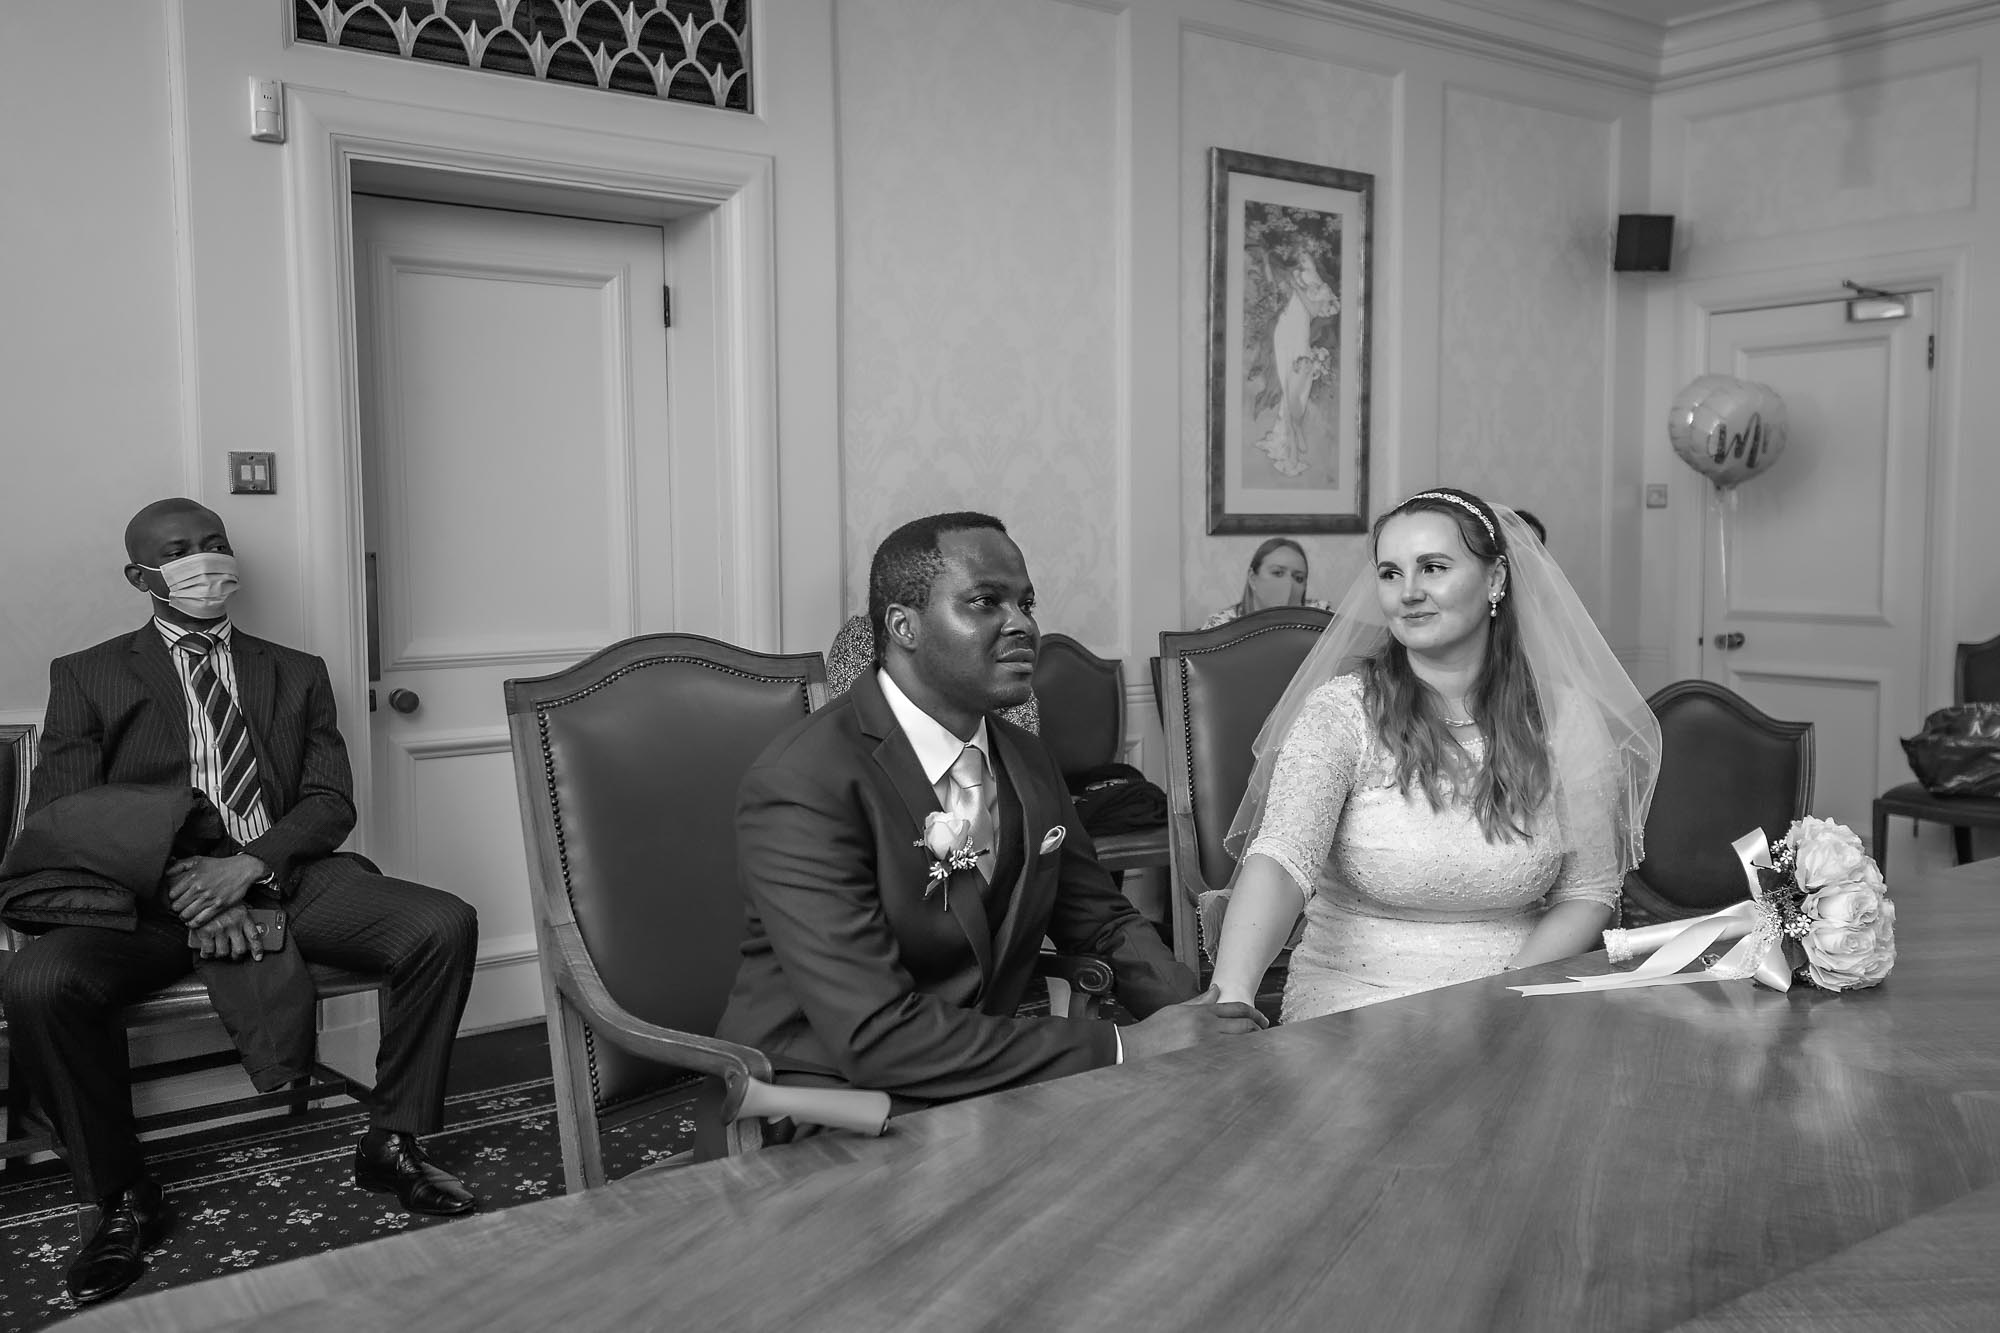 The bride gives her groom a loving look during their wedding at Wandsworth Town Hall